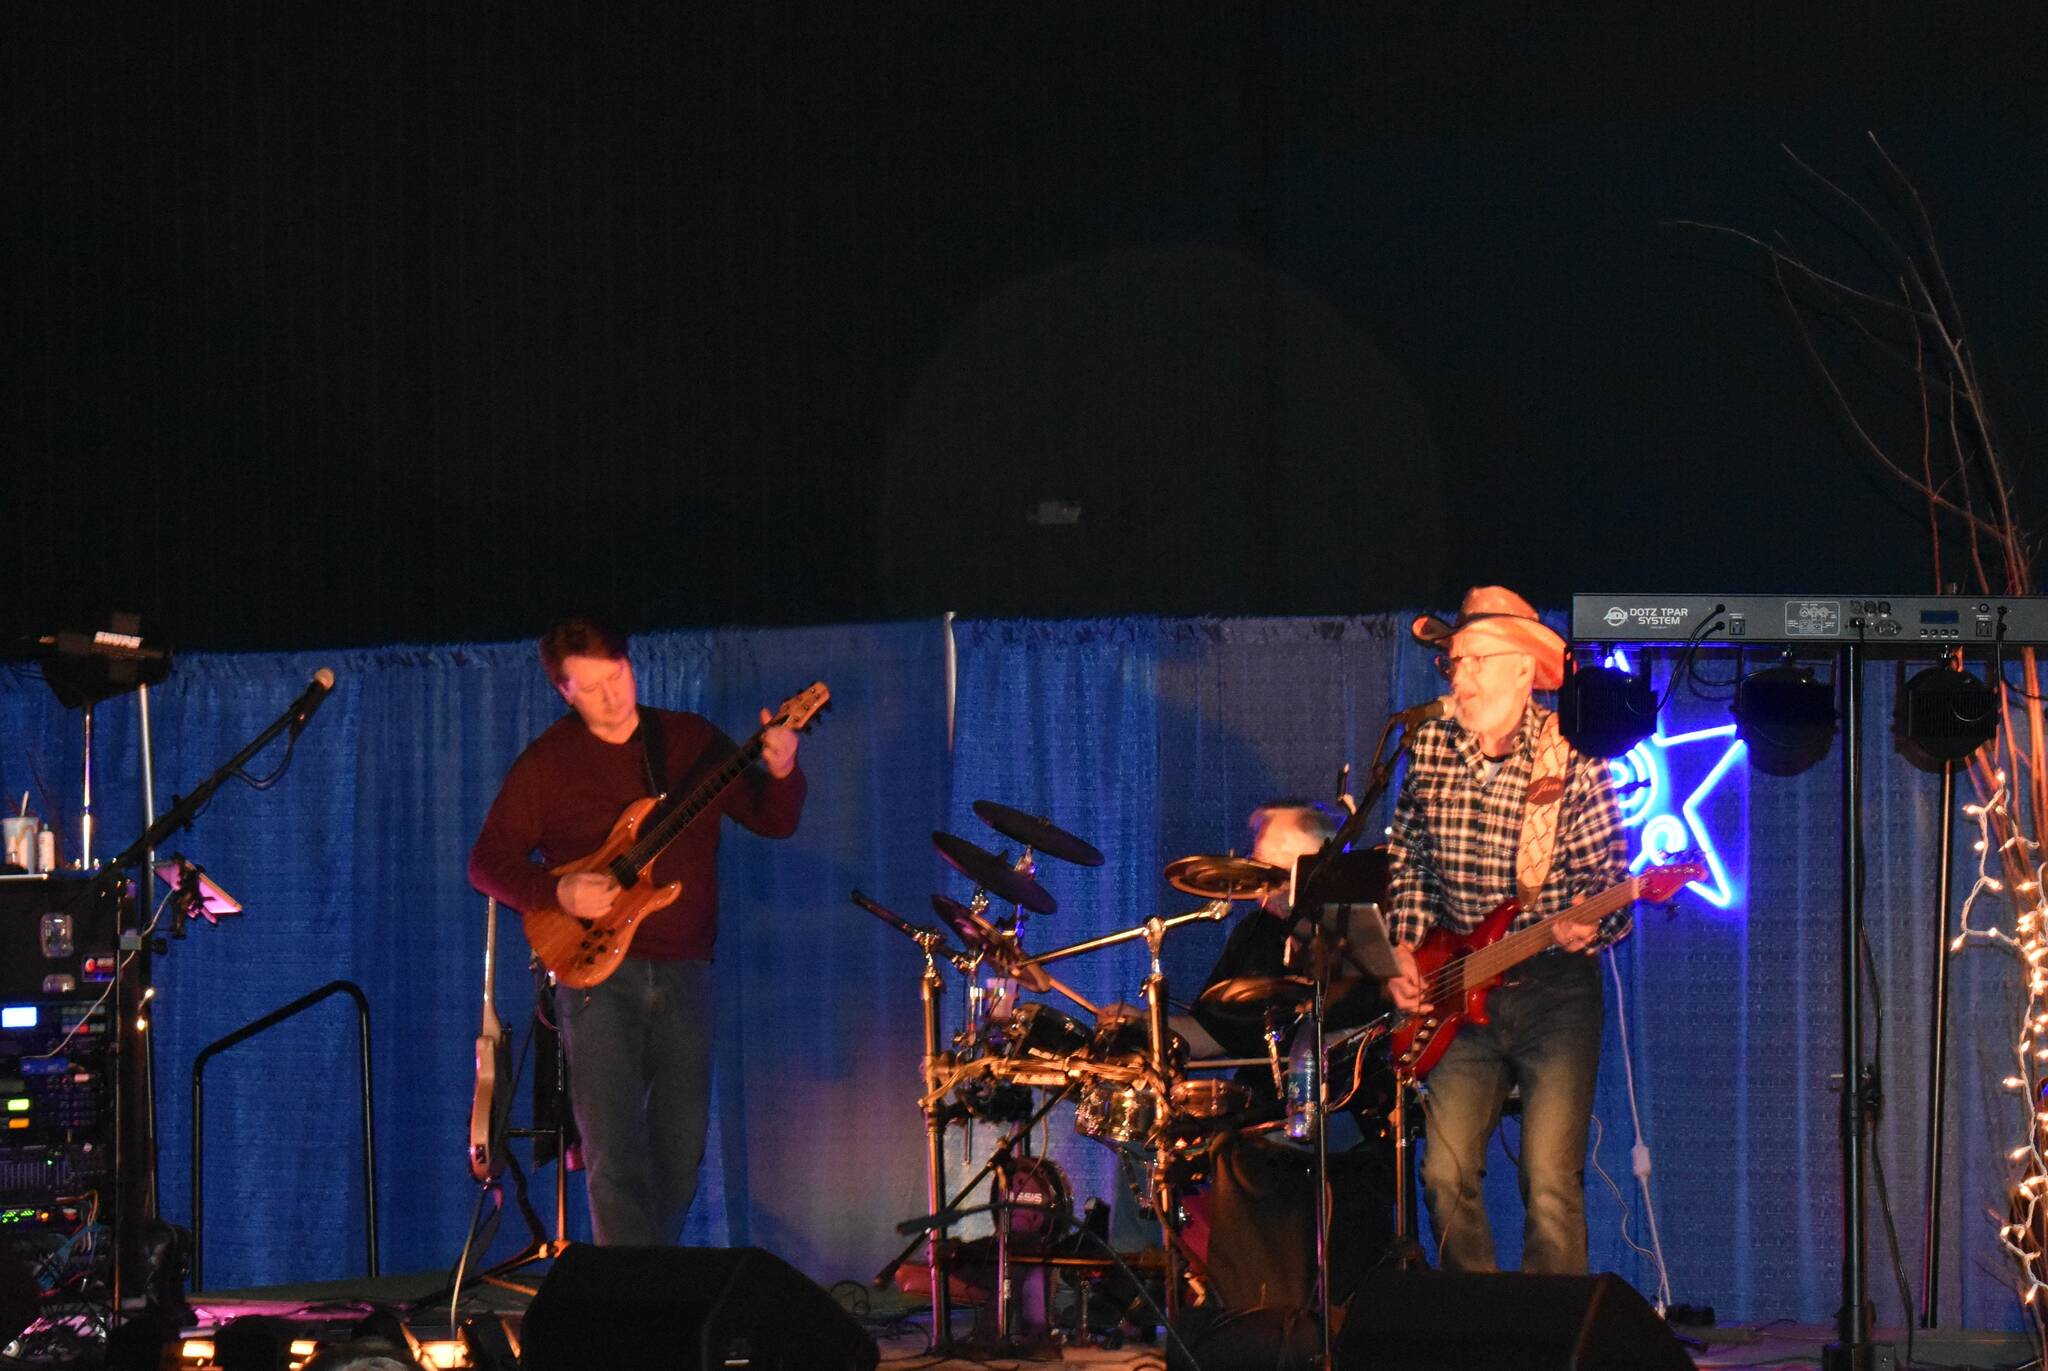 Allen Leister / The Daily World 
Live music performances from Backfire Band (pictured), Jokers Wild, and The Olson Brothers drew large crowds within the Mike Murphy Pavilion during the 14th annual Elma Winter Wine Festival on Saturday, Jan. 21.